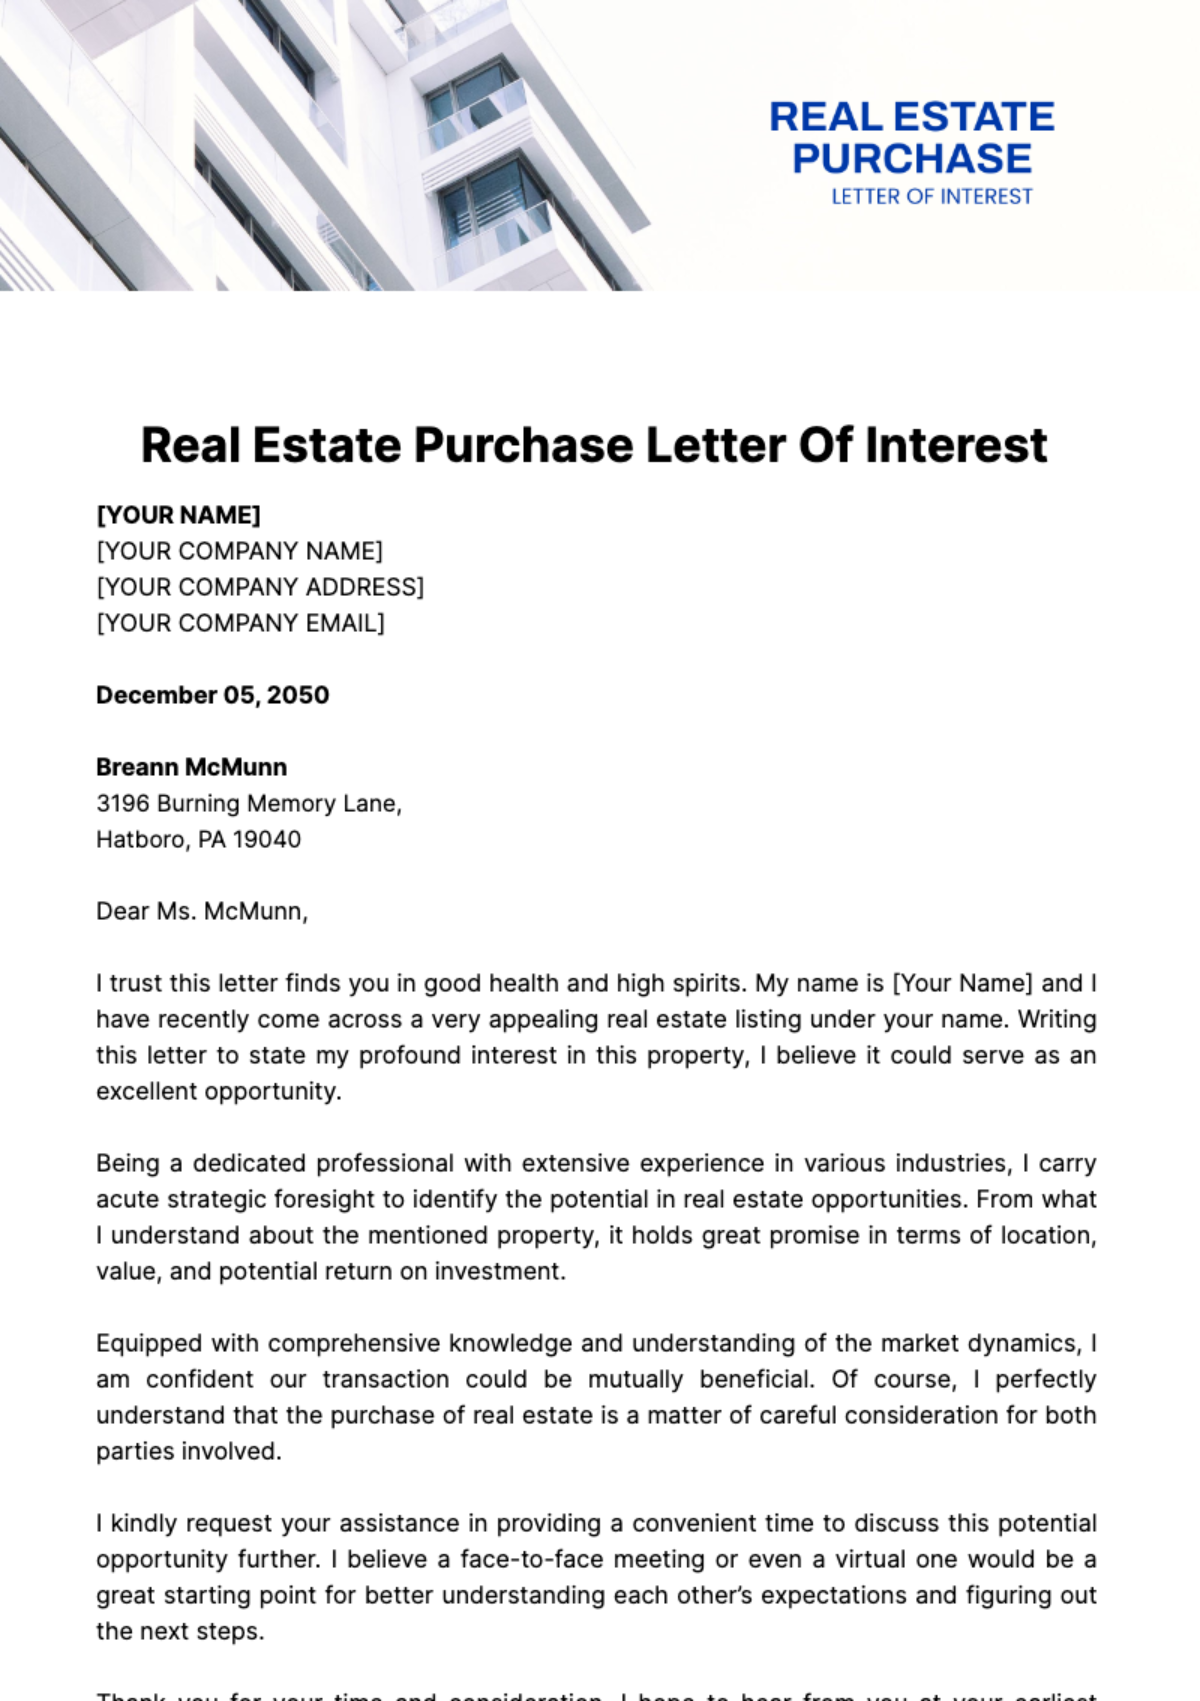 Real Estate Purchase Letter of Interest Template